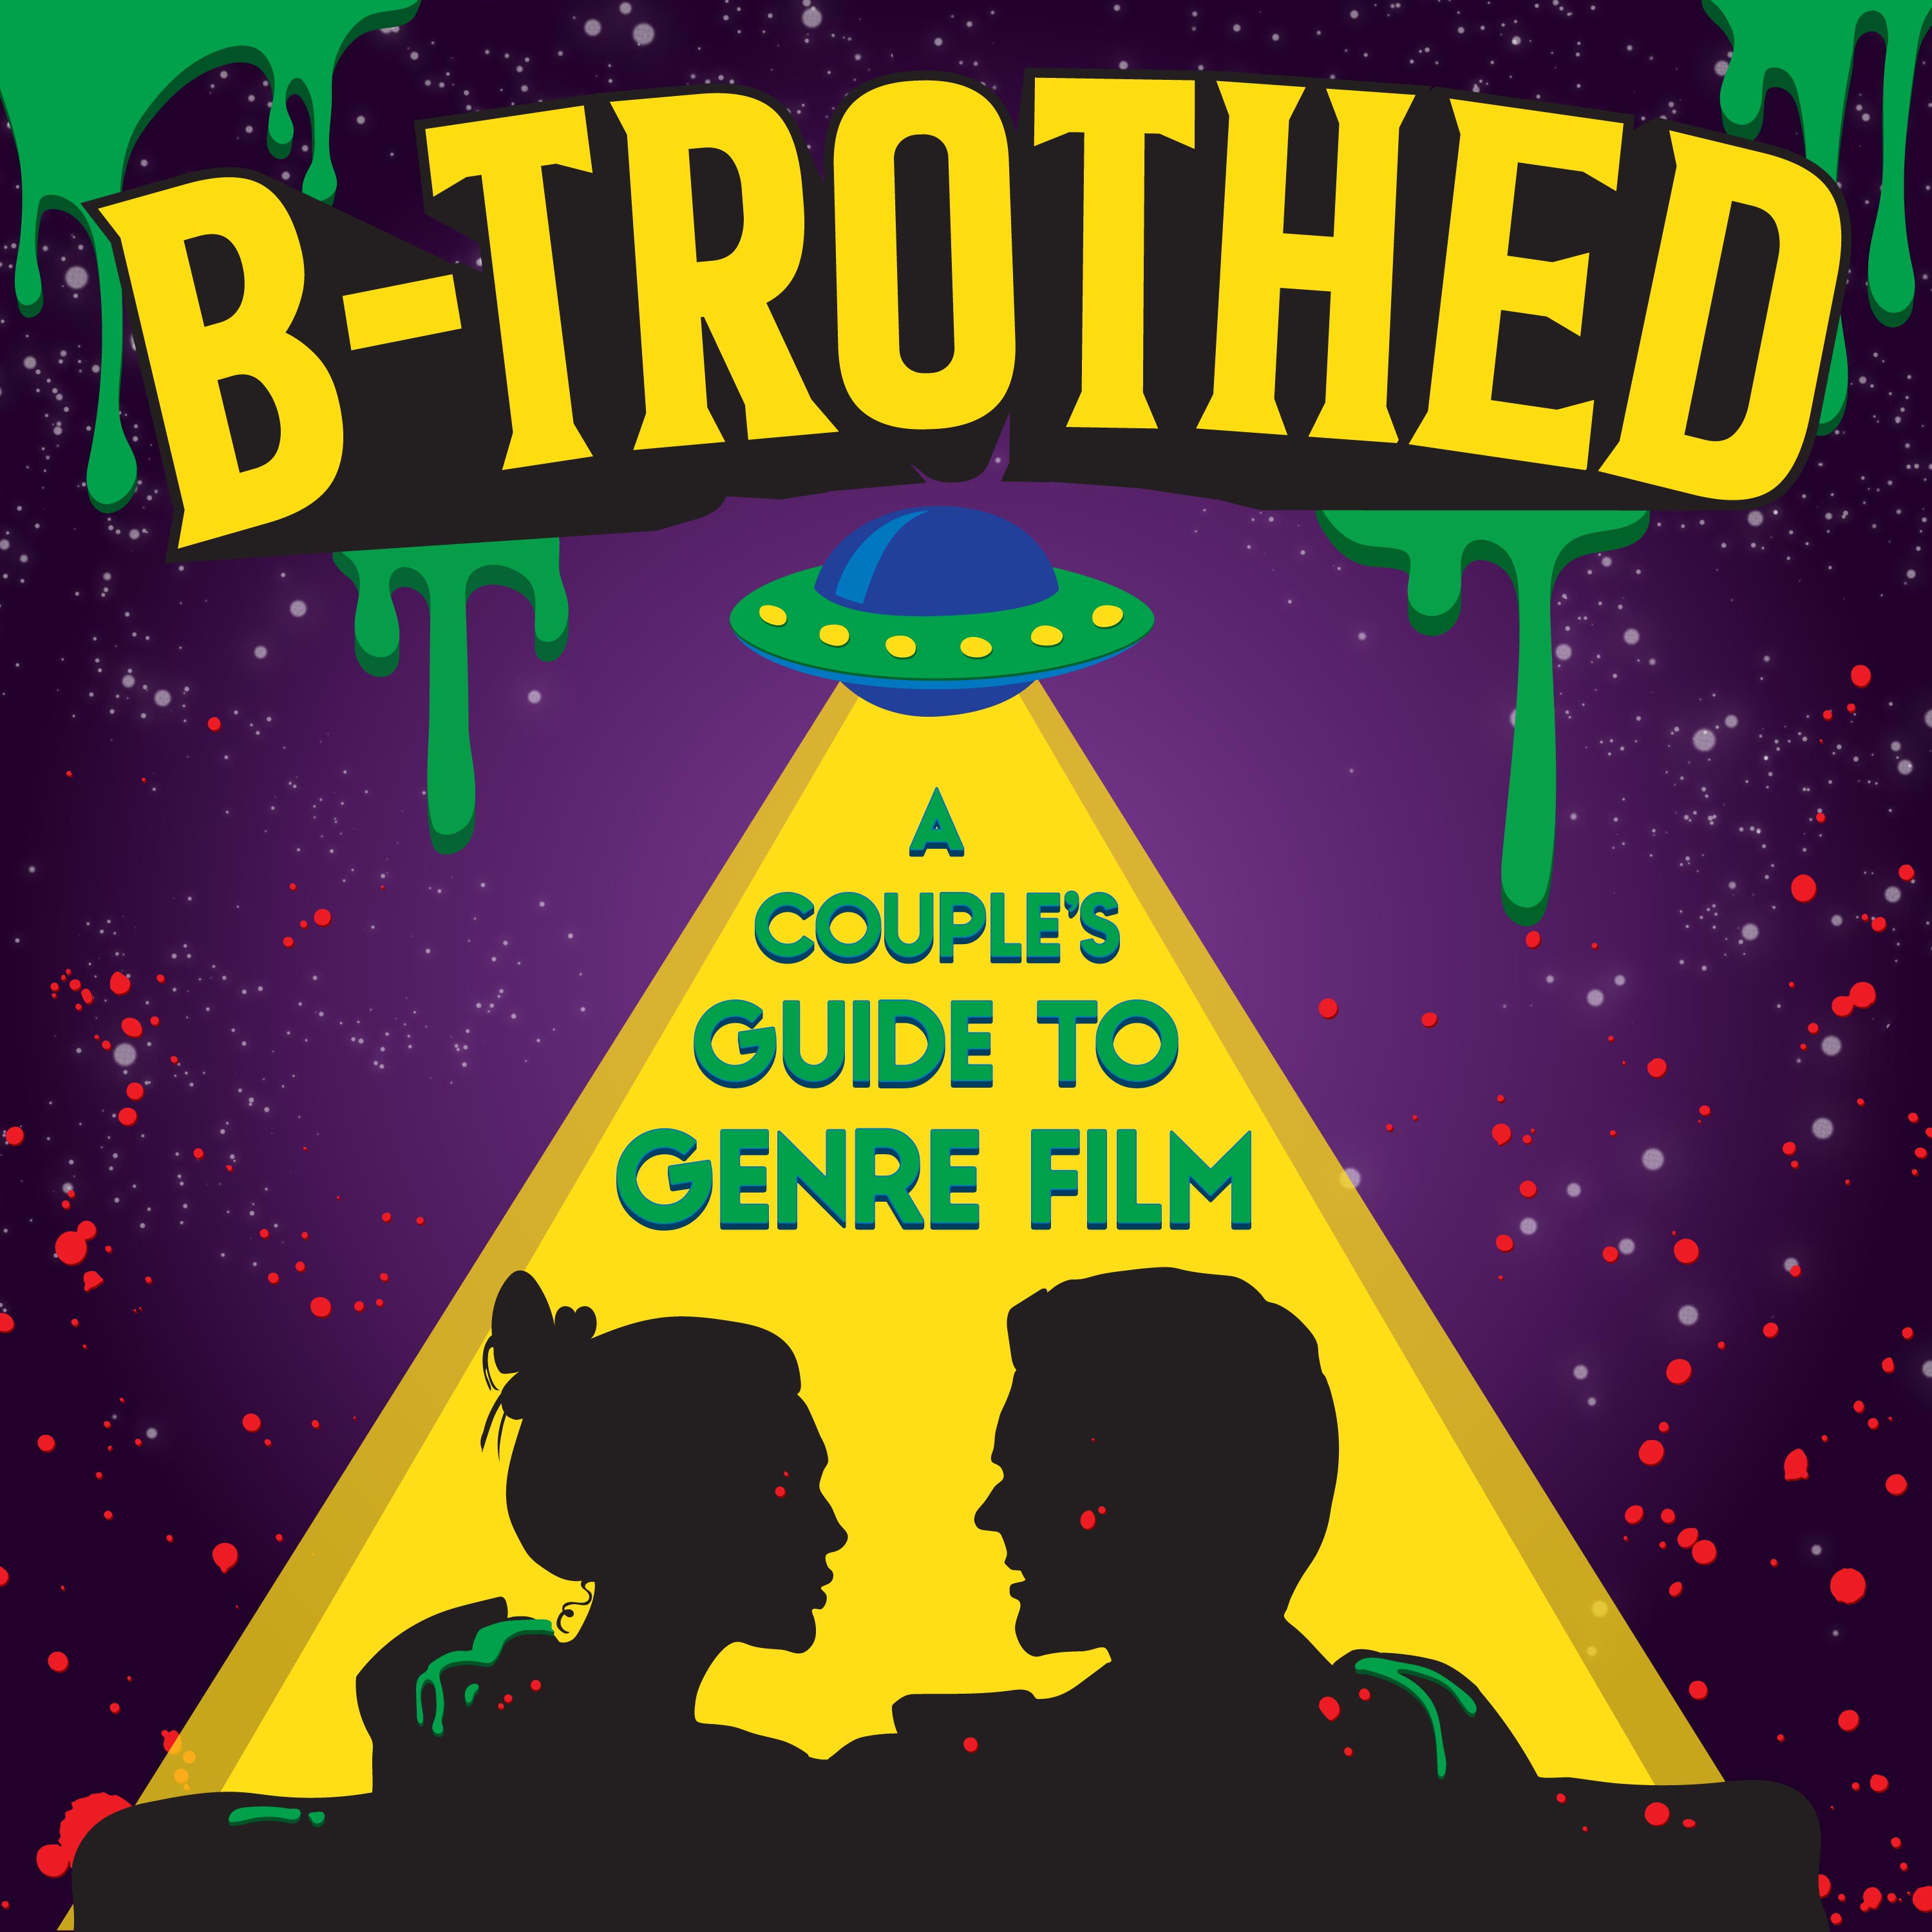 Show artwork for B-trothed